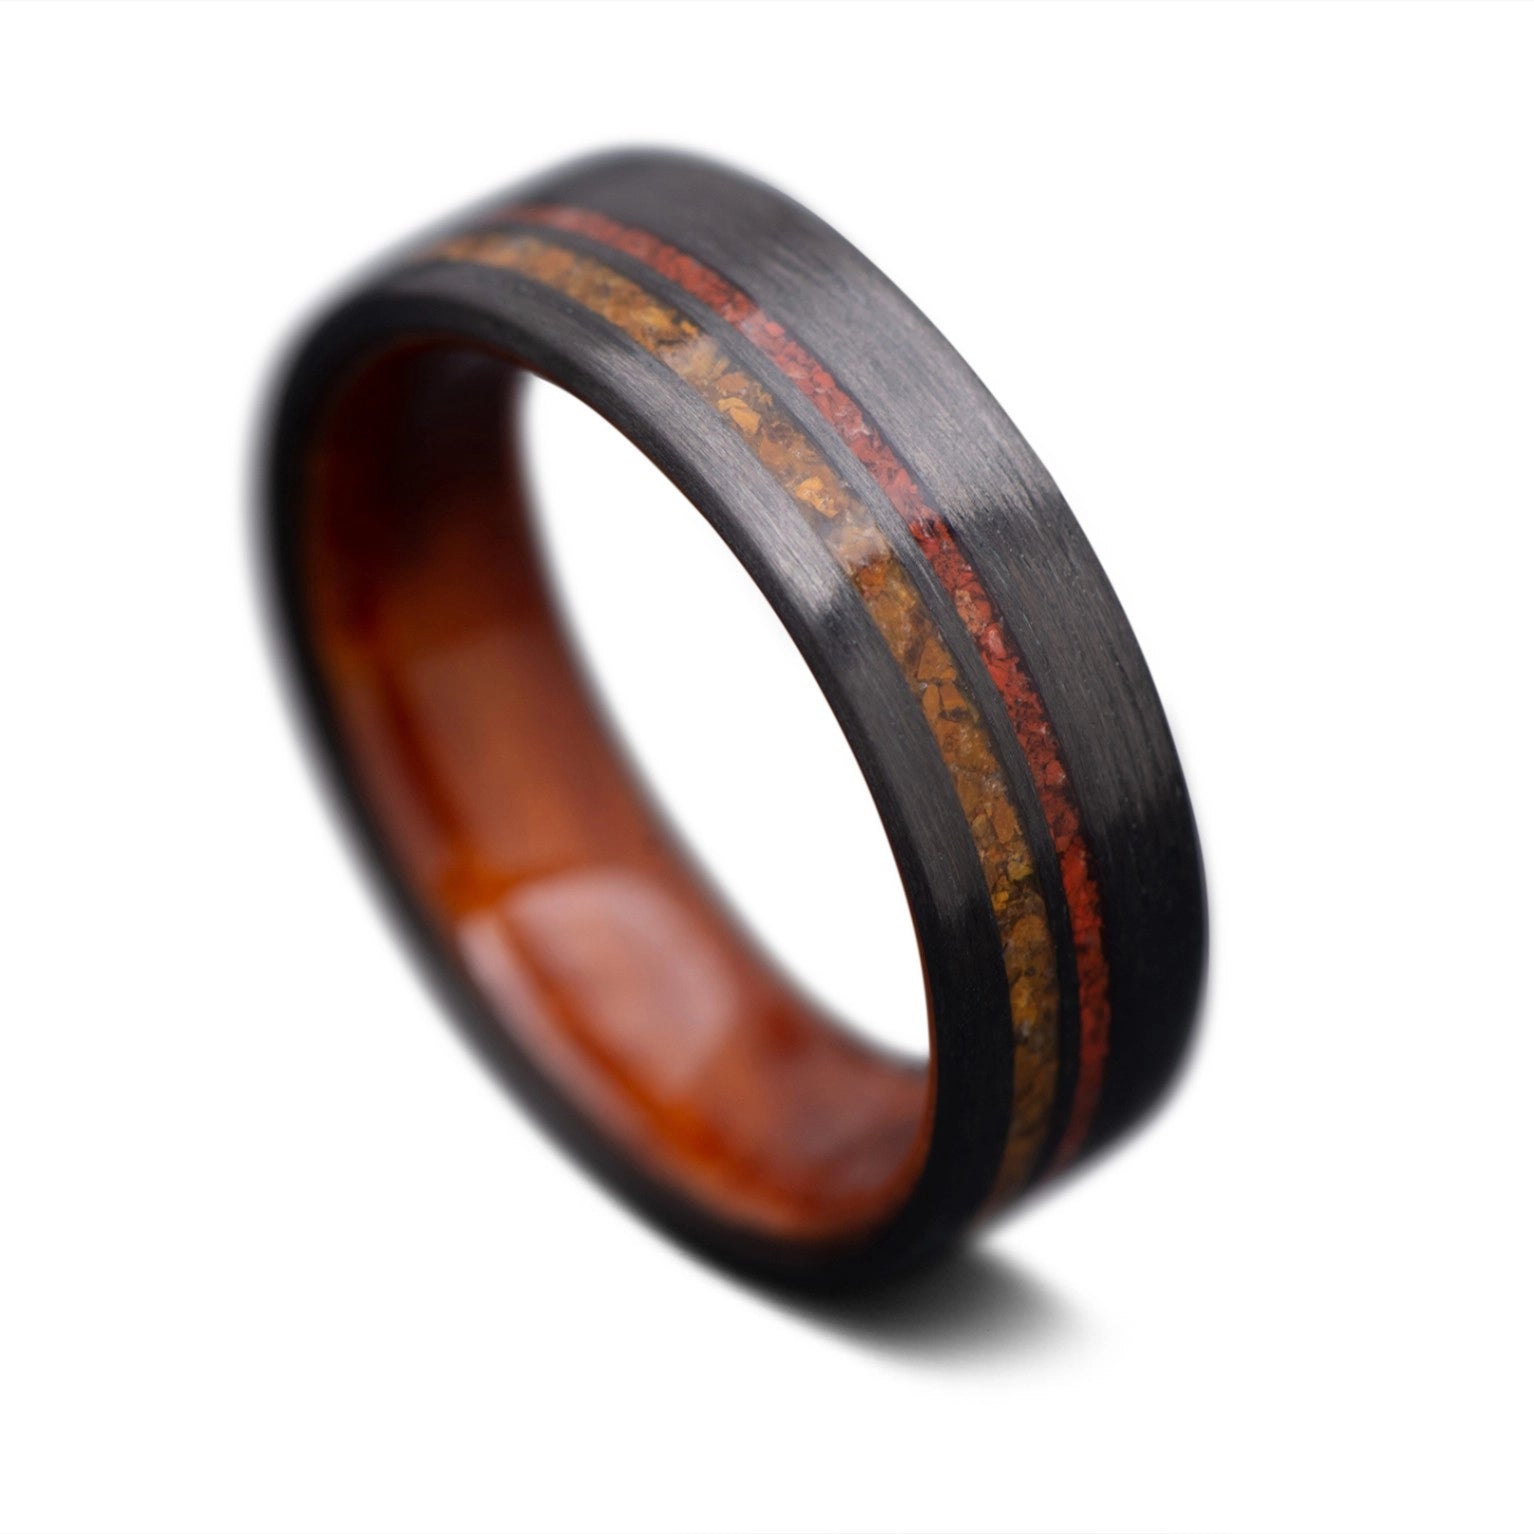 CarbonUni Ring with Tiger Eye, Red Jasper inlay and Thuya wood inner sleeve, 7mm -THE INNOVATOR